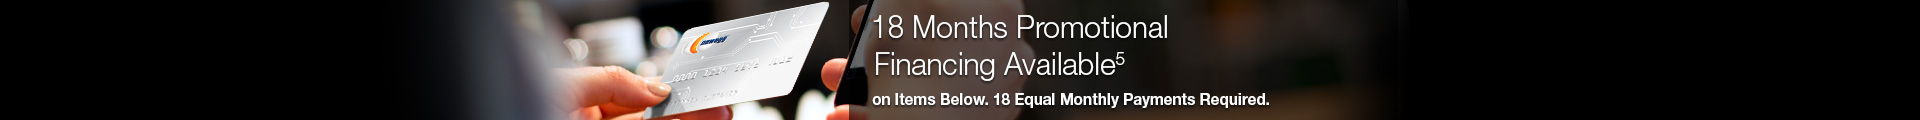 18 Months Promotional Financing available